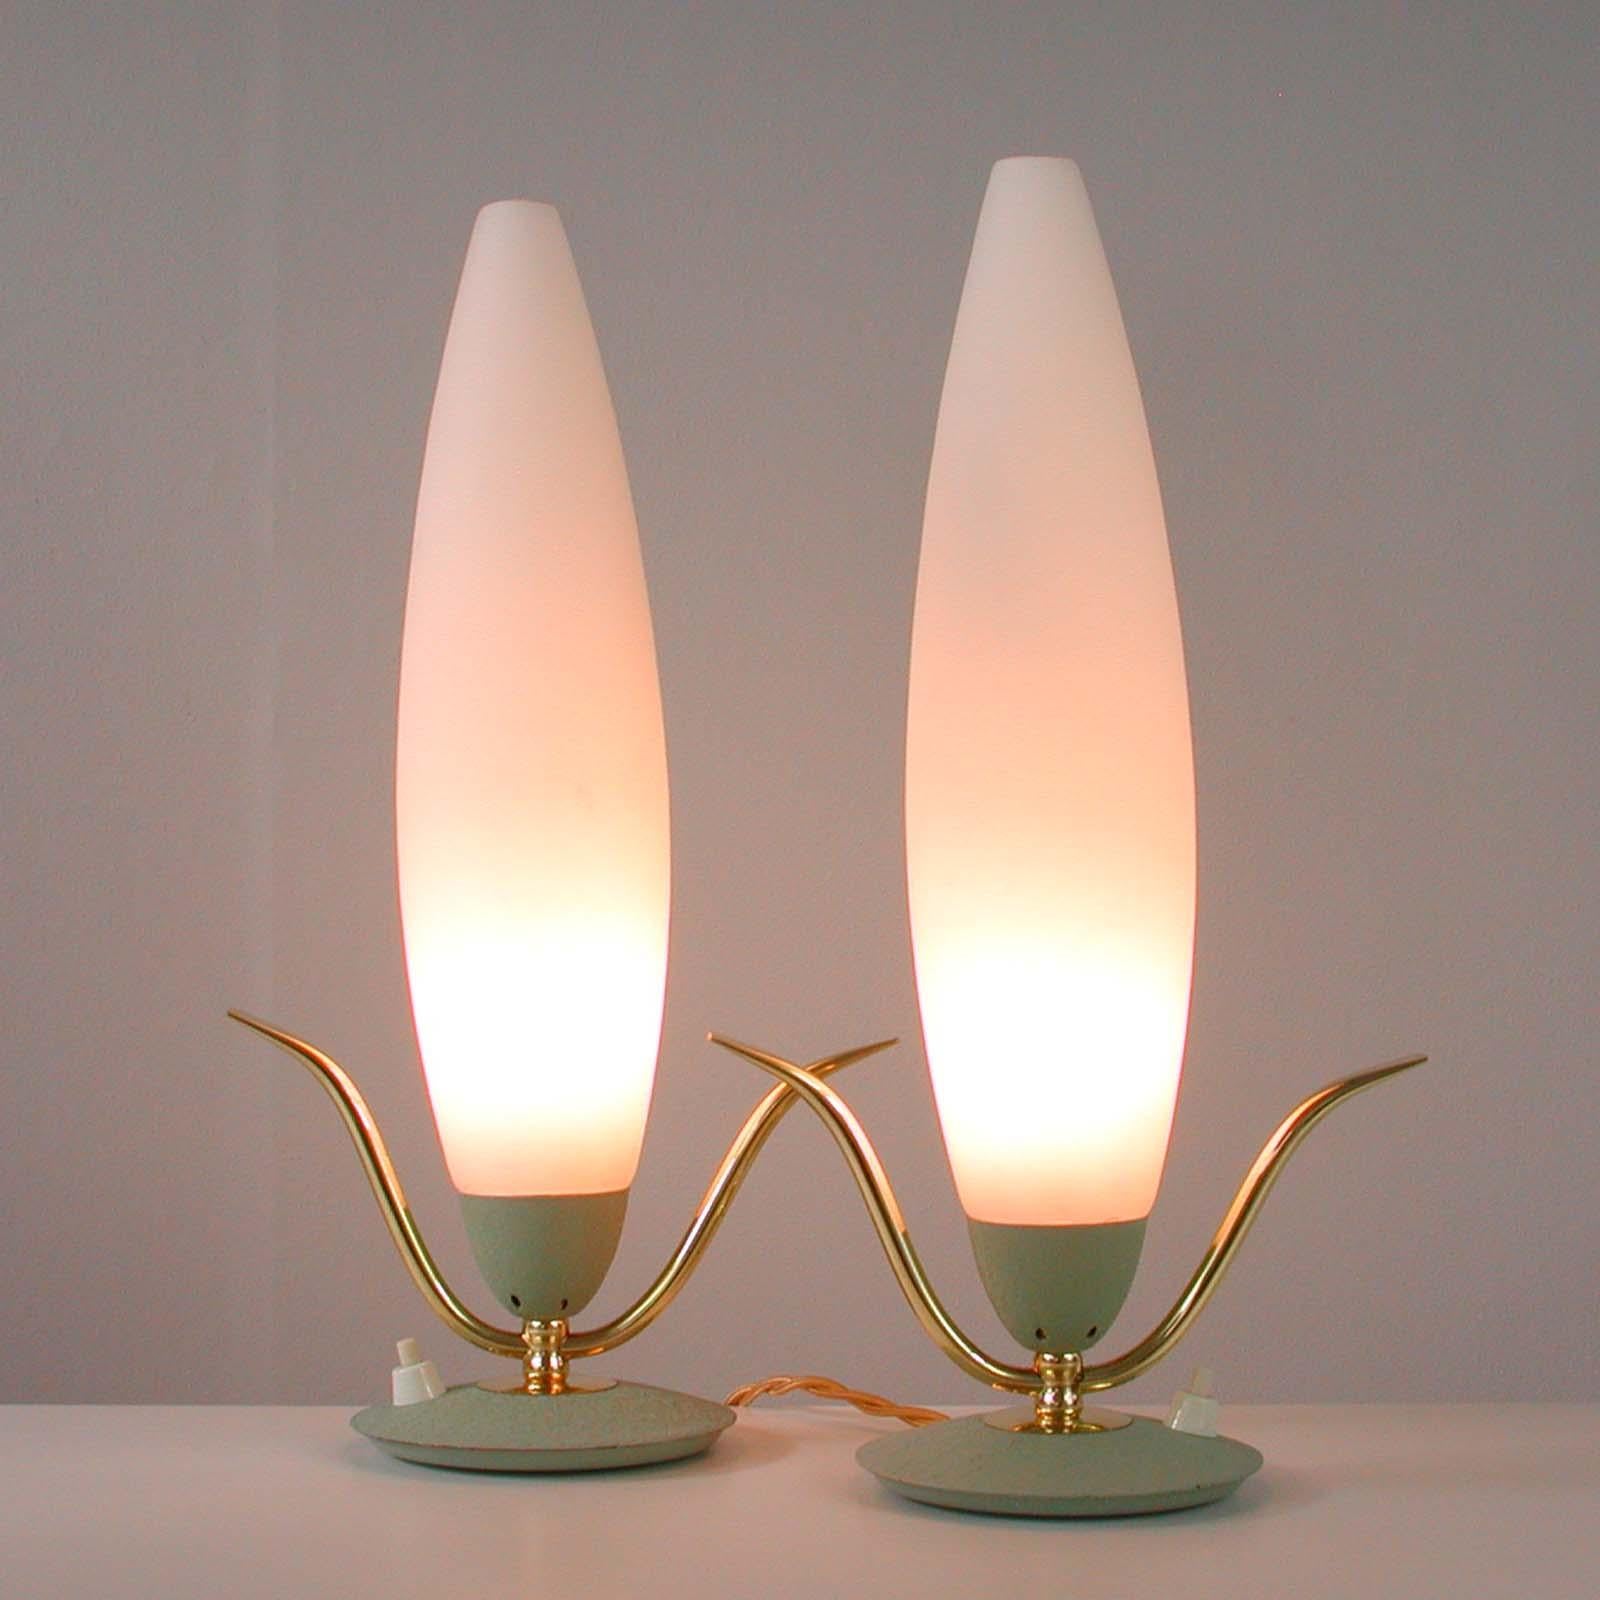 Midcentury Italian Sputnik Mint and Satinated Glass Table Lamps, 1950s, Set of 2 For Sale 3